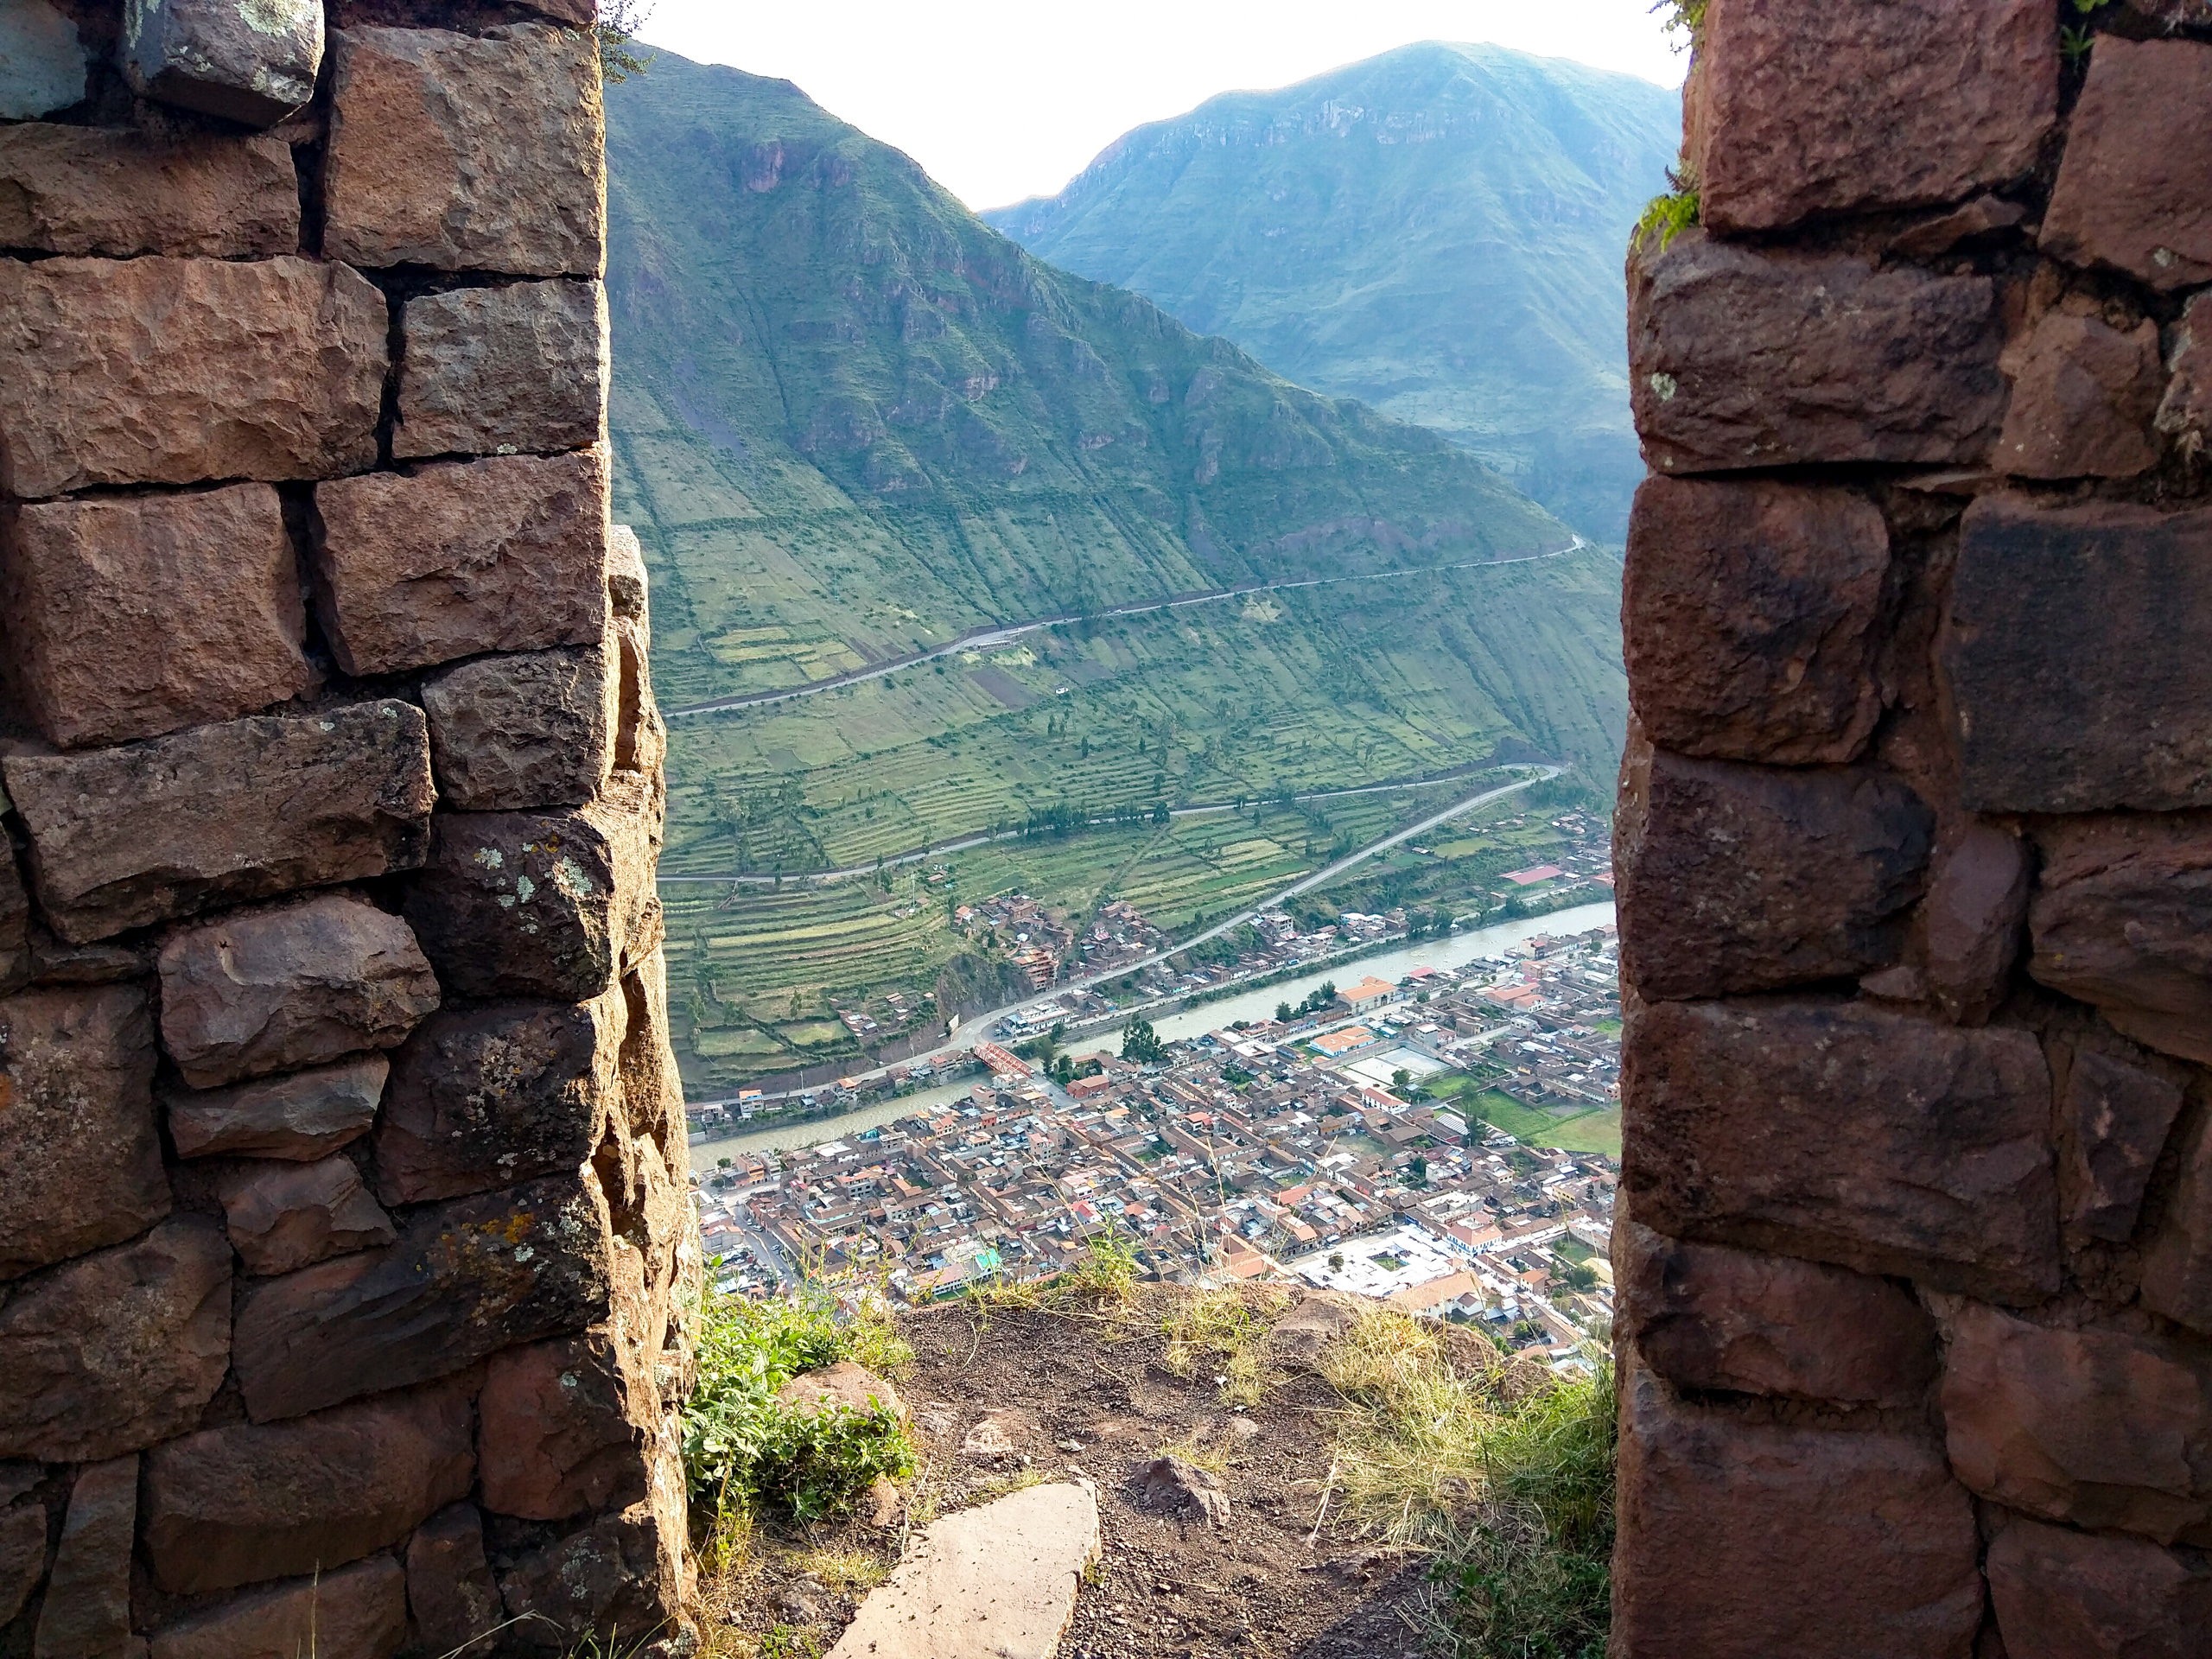 Looking down from the ruins above Pisac.